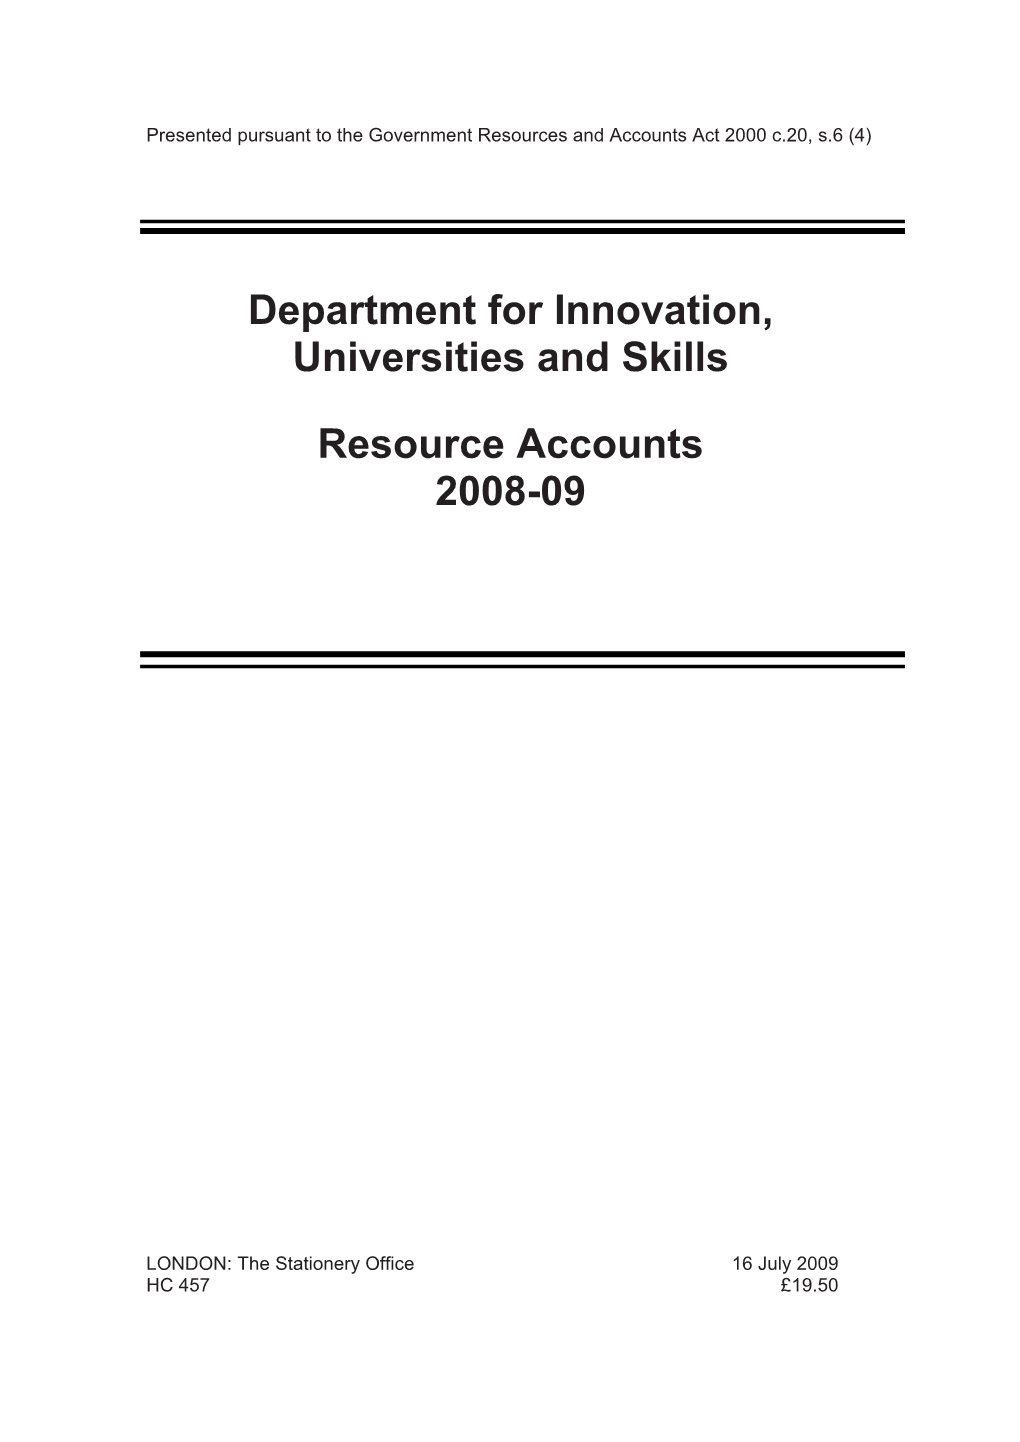 Department for Innovation, Universities and Skills Resource Accounts 2008-09